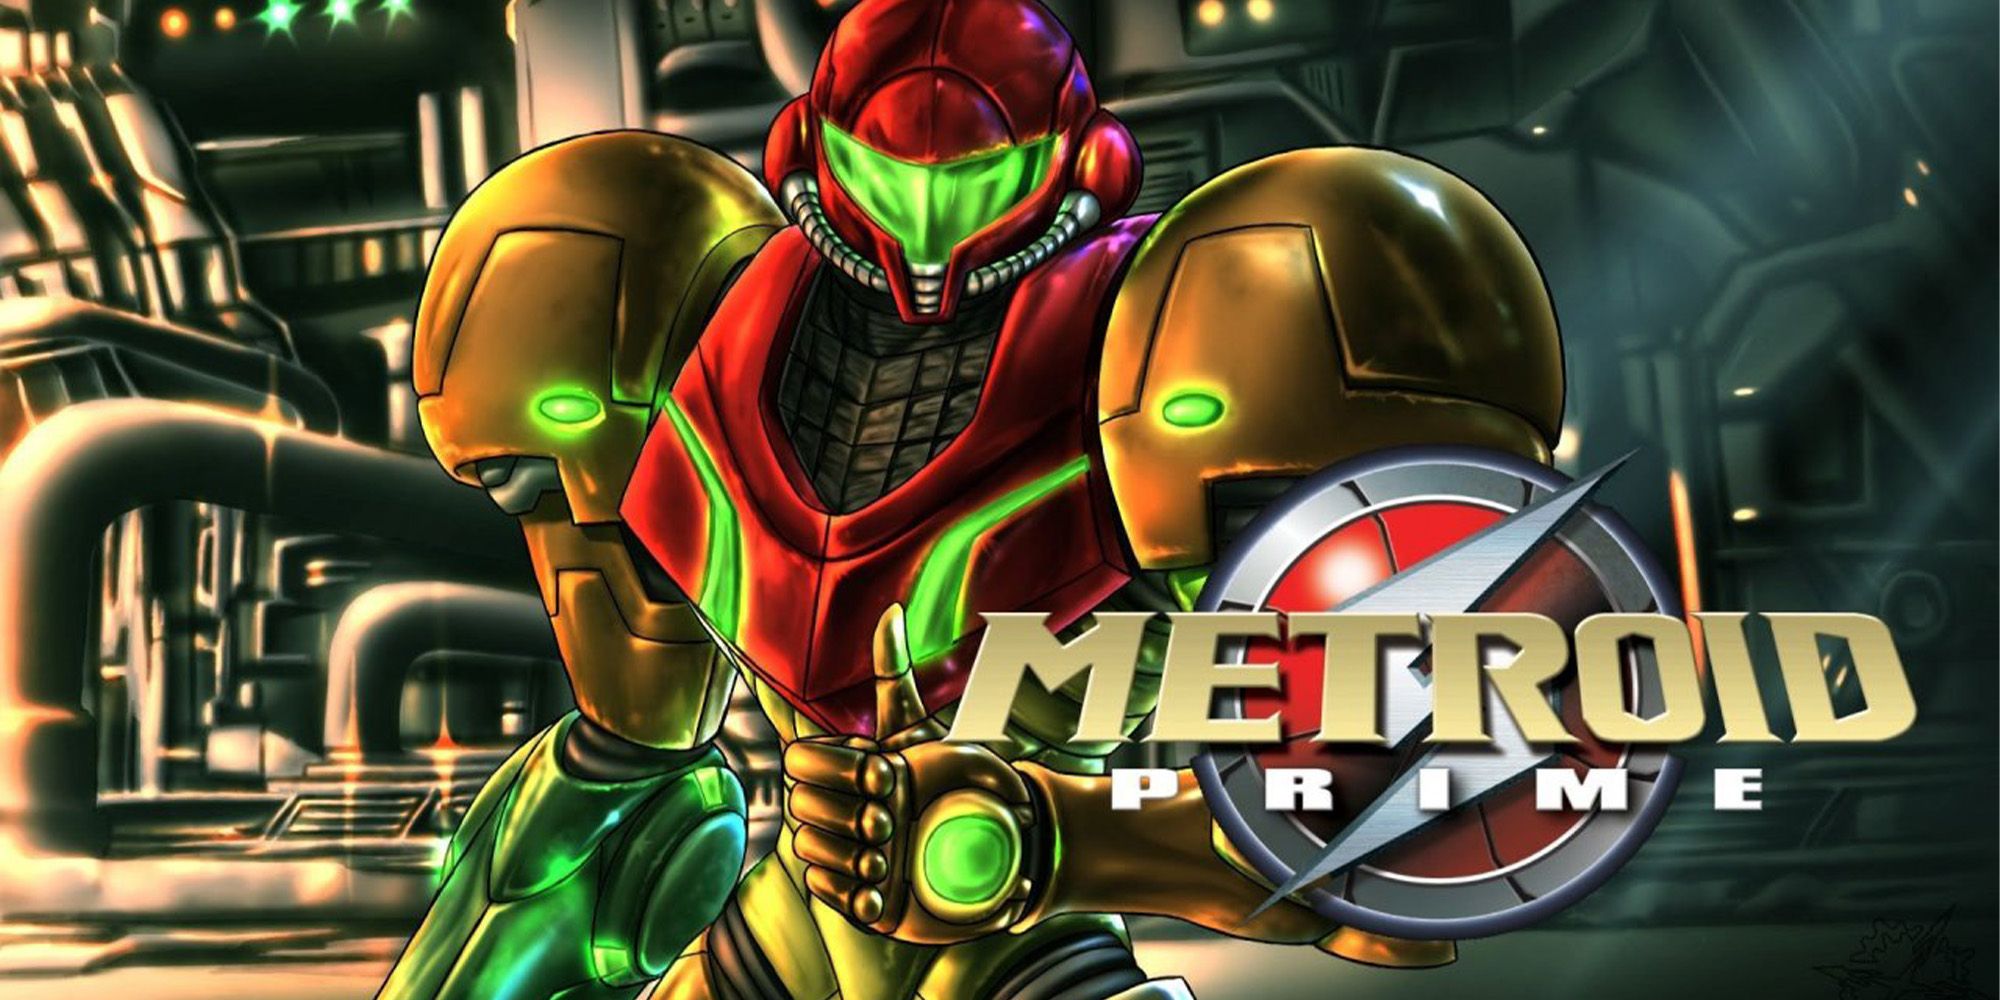 Promotional Art for Metroid Prime from Nintendo Life Magazine featuring Samus Arin in here power suit